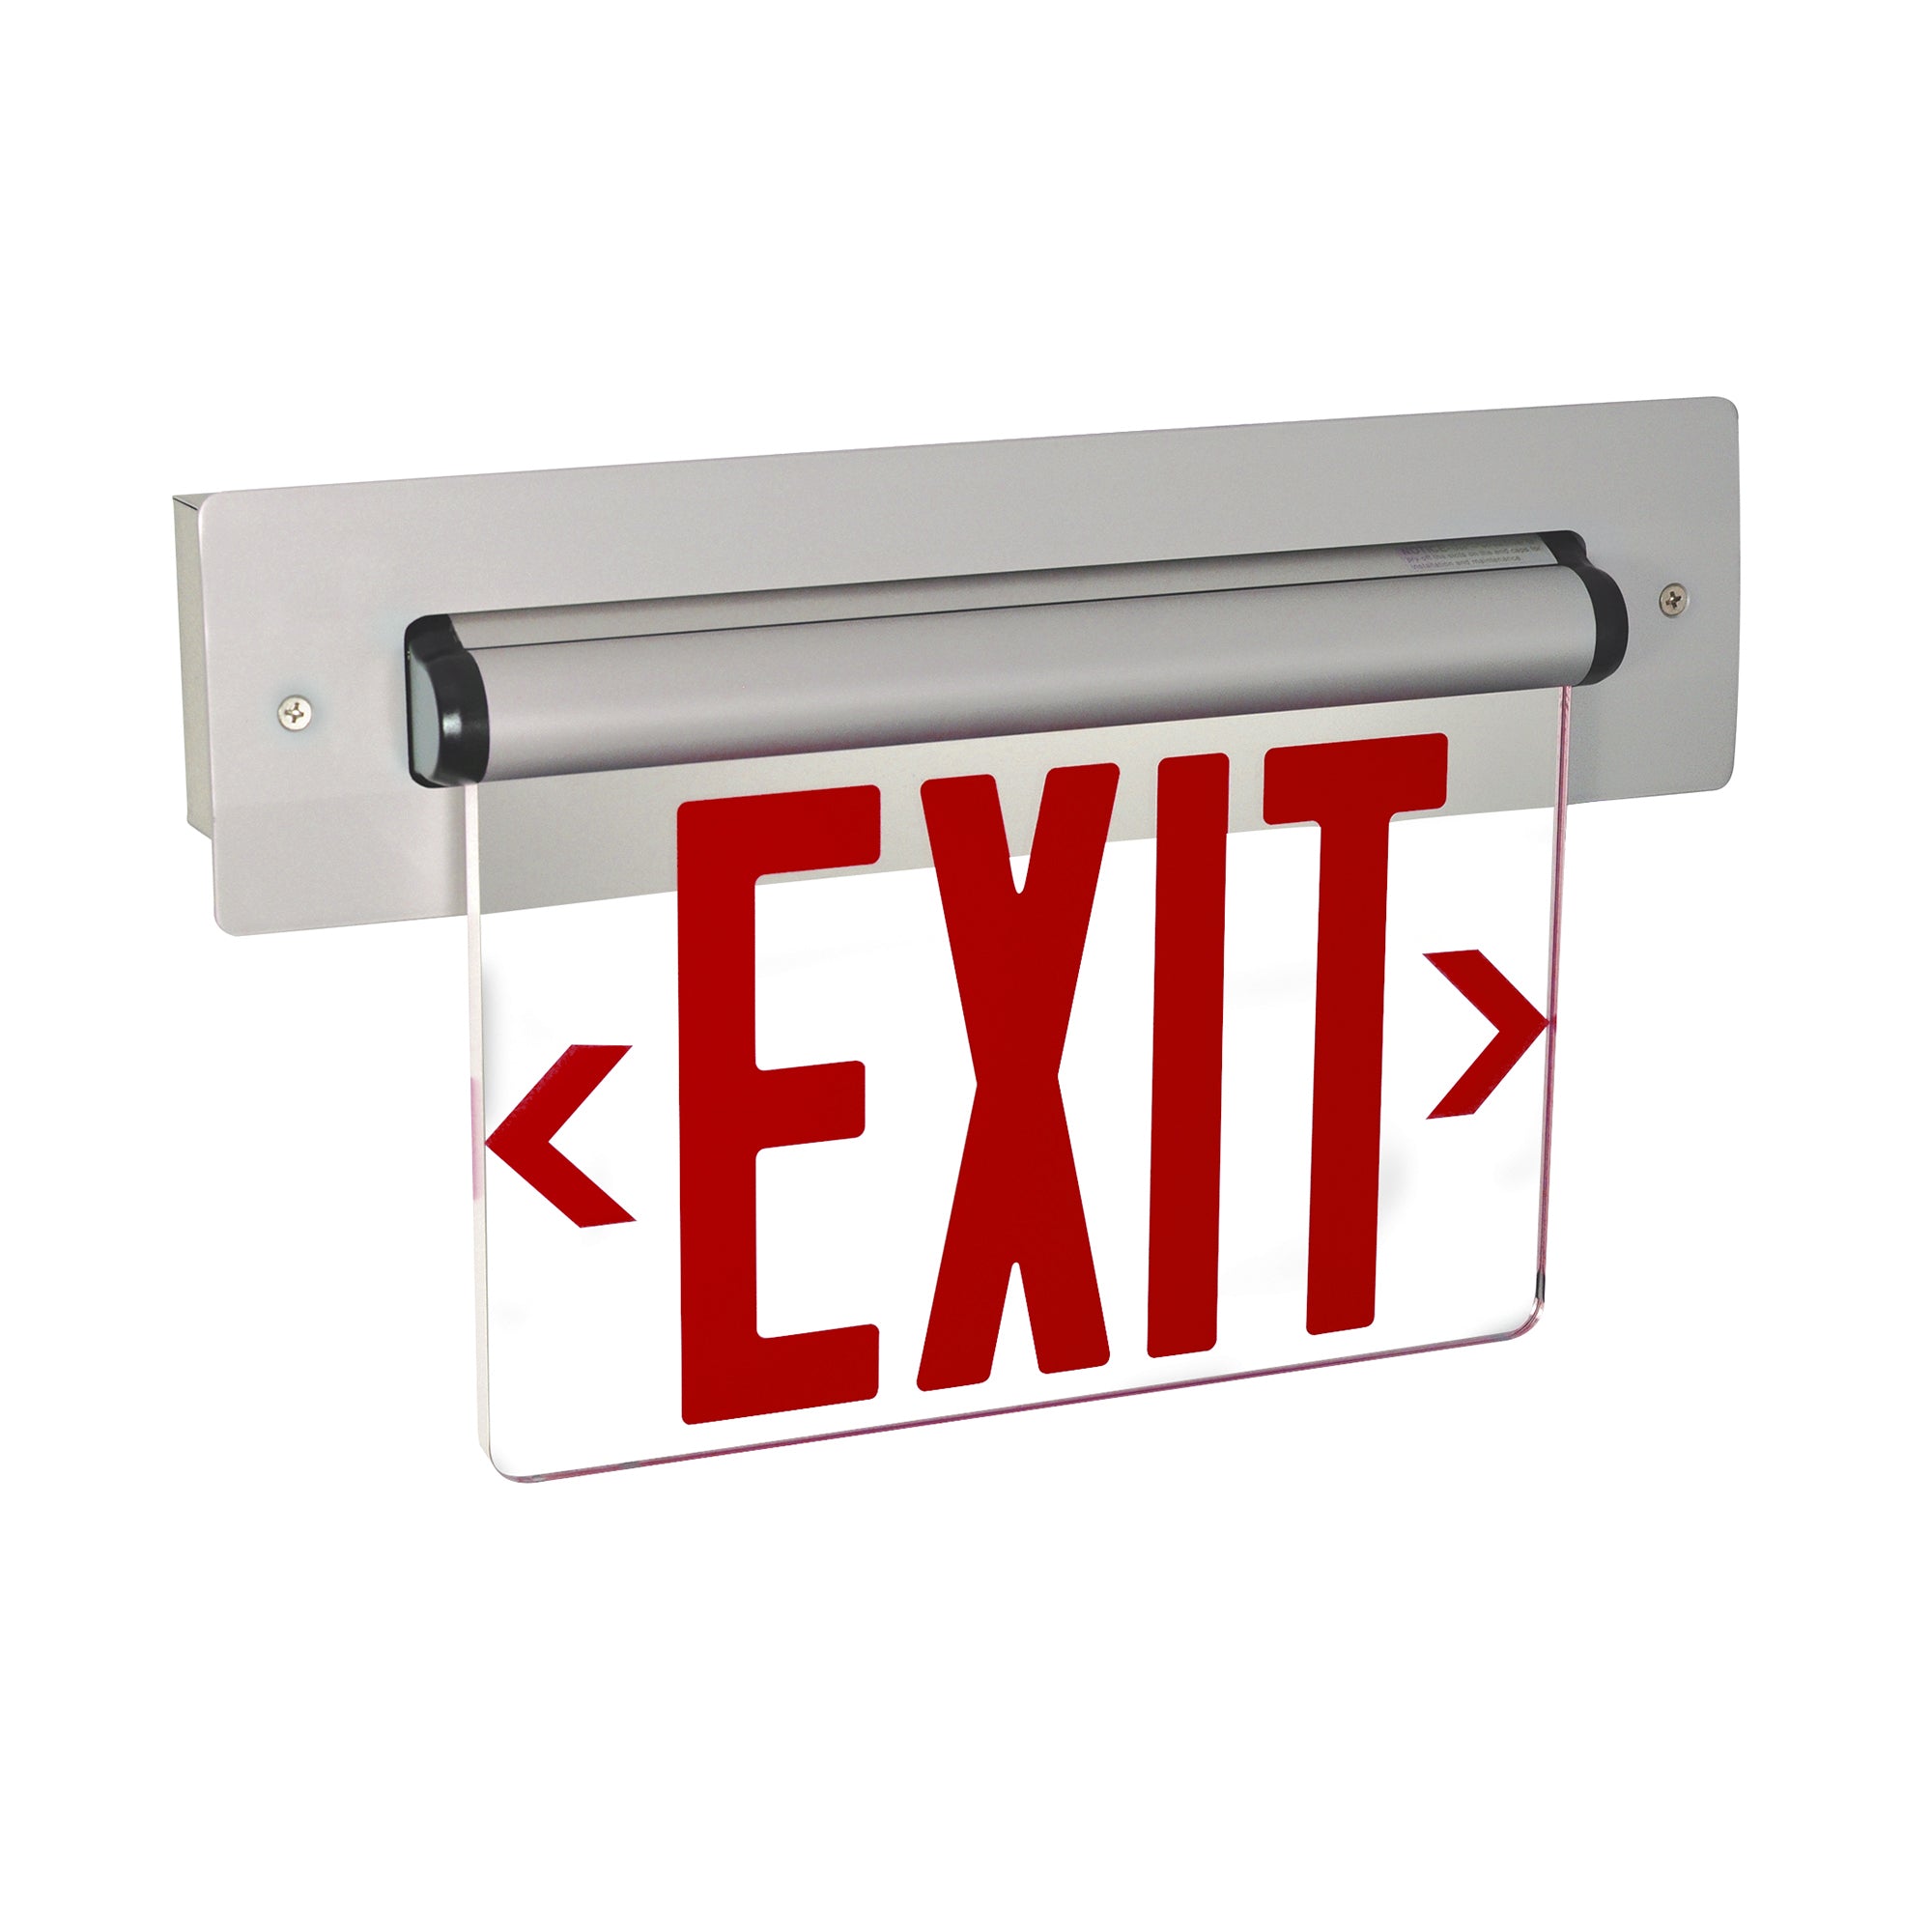 Nora Lighting NX-813-LEDRCA - Exit / Emergency - Recessed Adjustable LED Edge-Lit Exit Sign, AC Only, 6 Inch Red Letters, Single Face / Clear Acrylic, Aluminum Housing